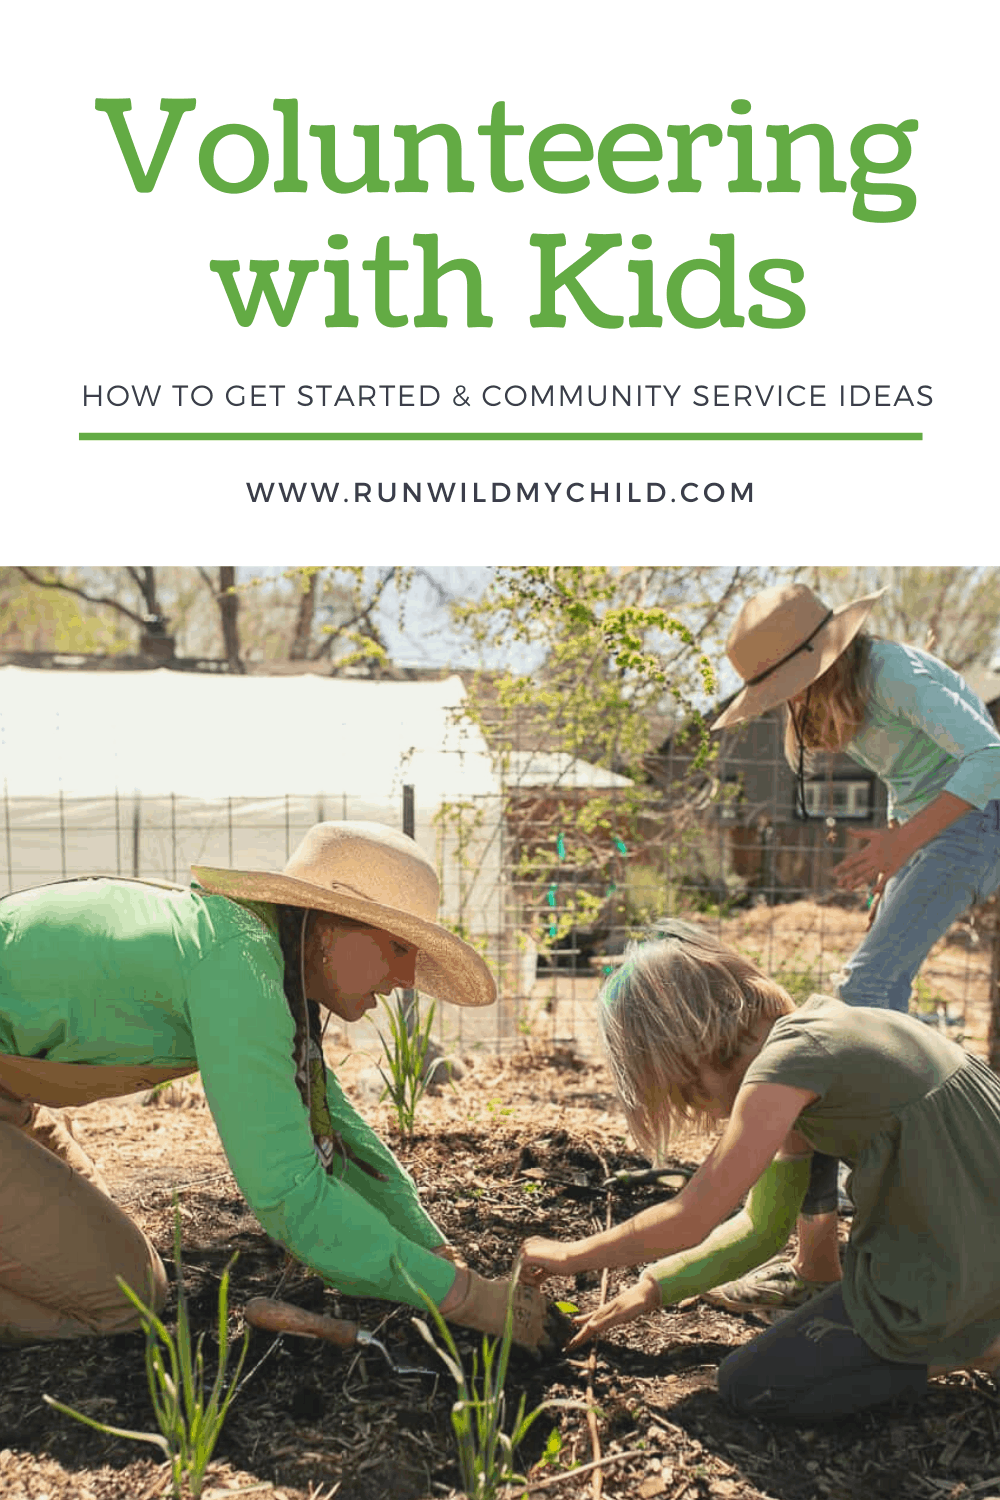 How to Get Started Volunteering With Kids & Community Service Ideas for Kids